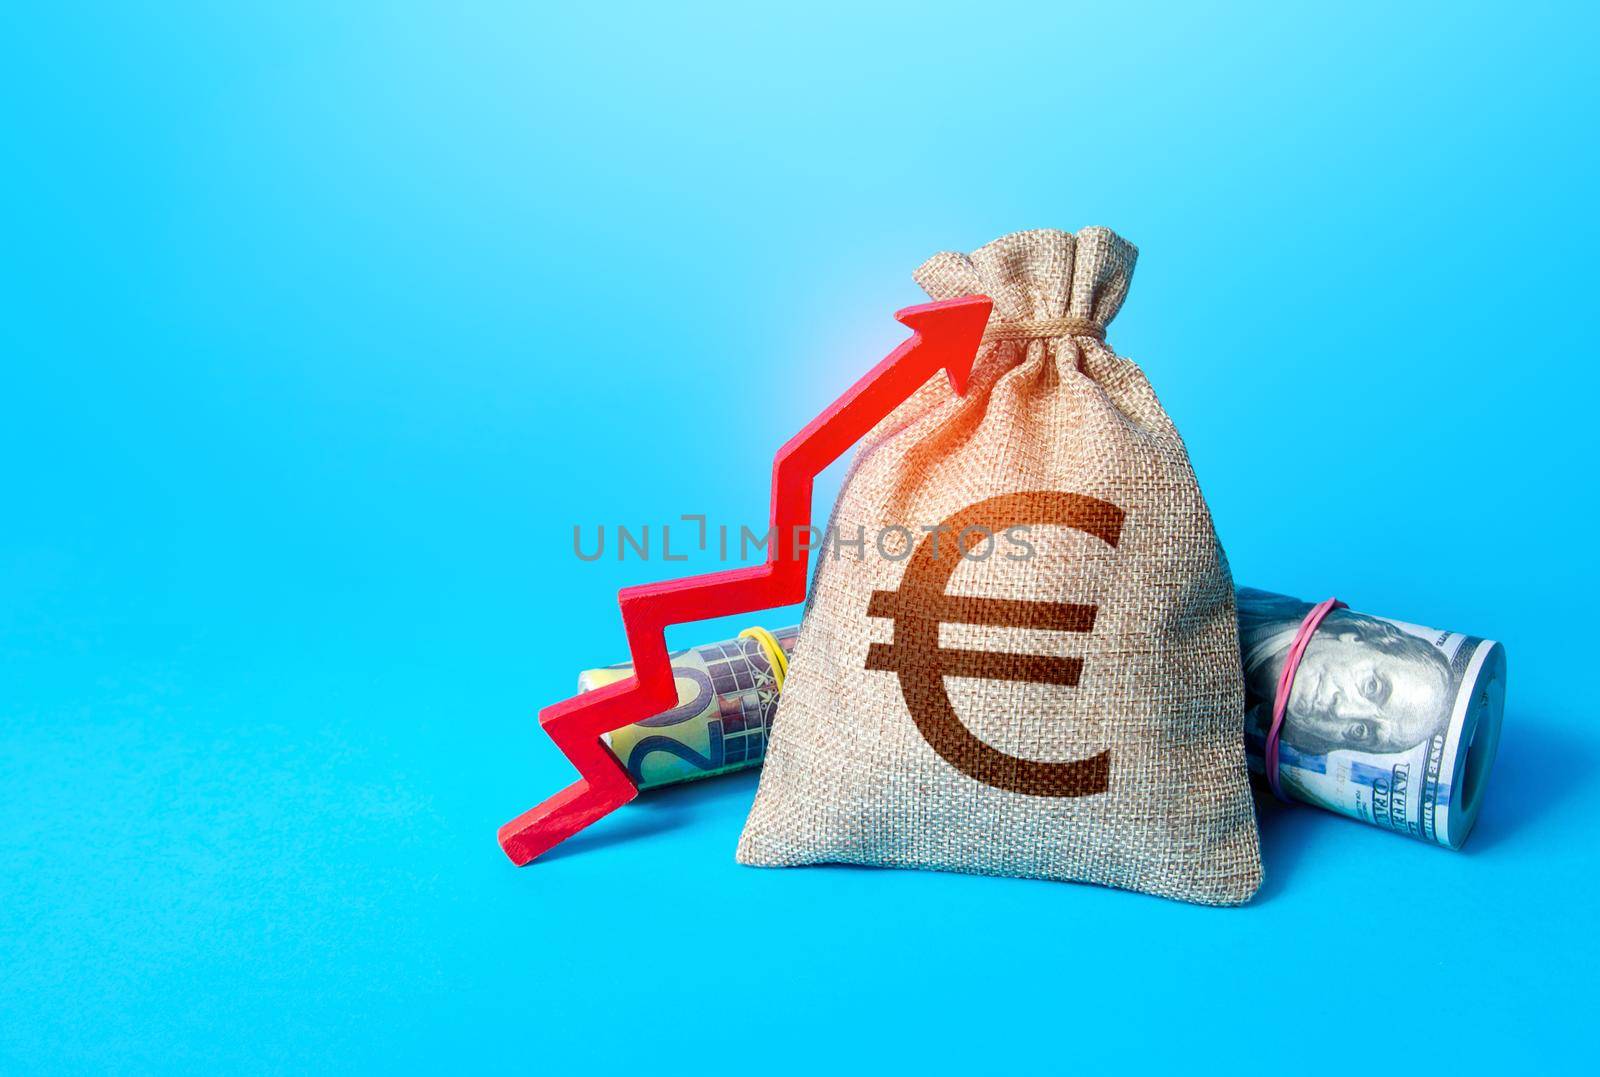 Euro money bag and red up arrow. Economic growth, GDP. Rise in profits, budget fees. Investments. Increase in the deposit rate. Increase income and business efficiency. Inflation acceleration.